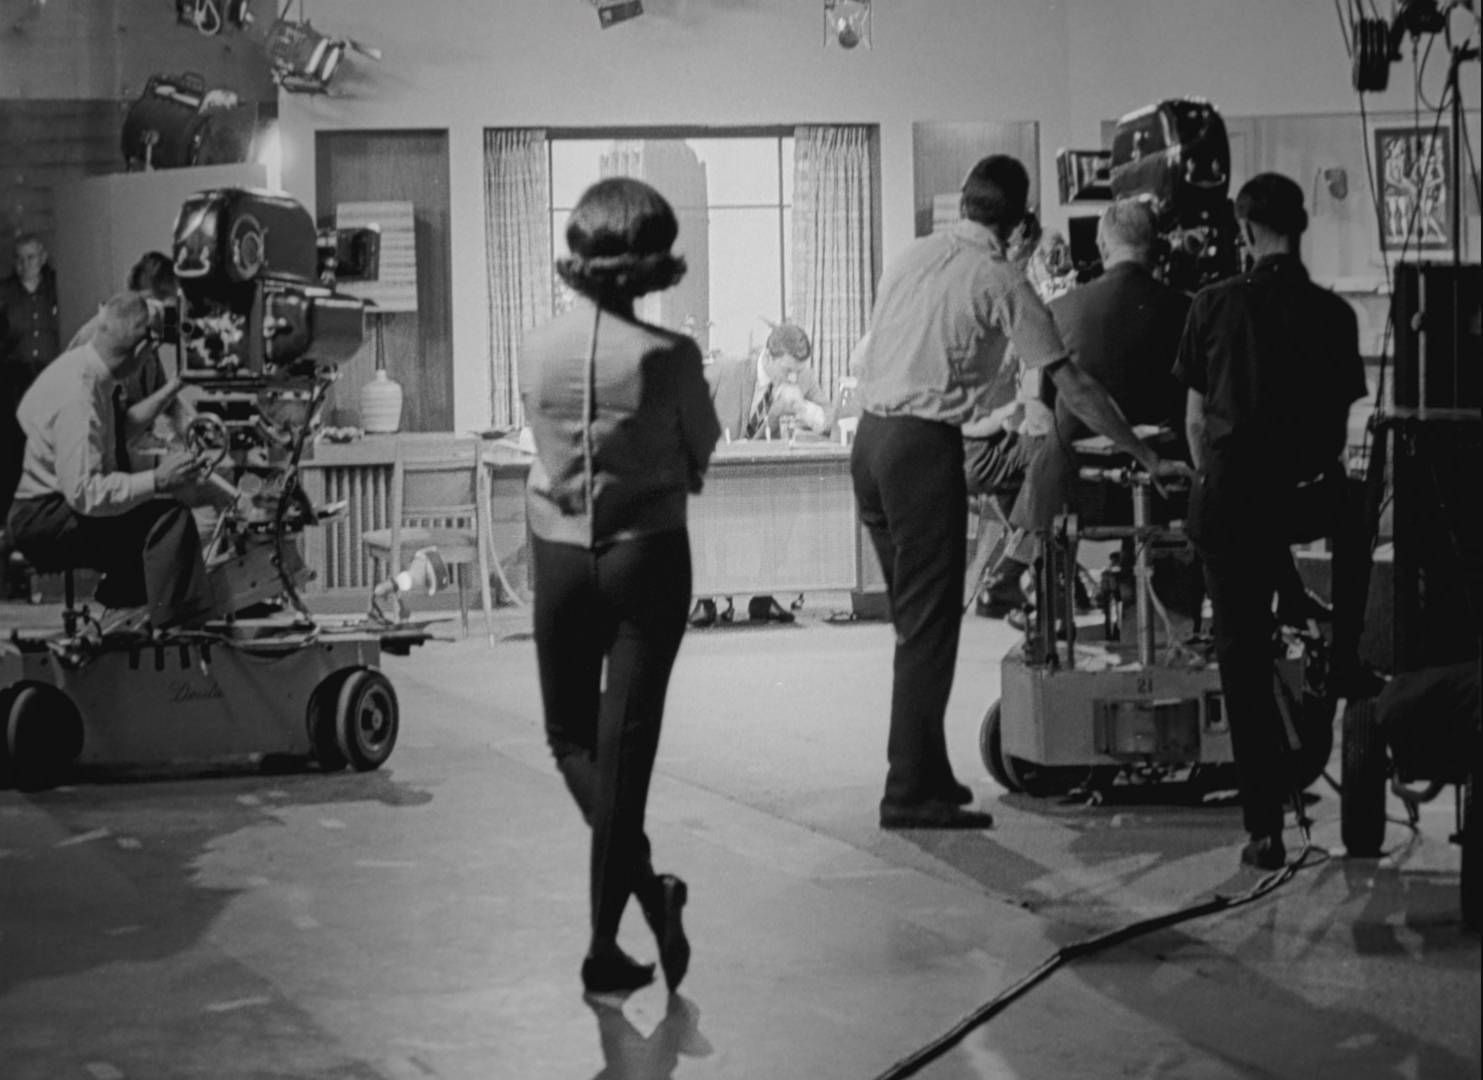 Mary Tyler Moore as Laura Petrie on The Dick Van Dyke Show set